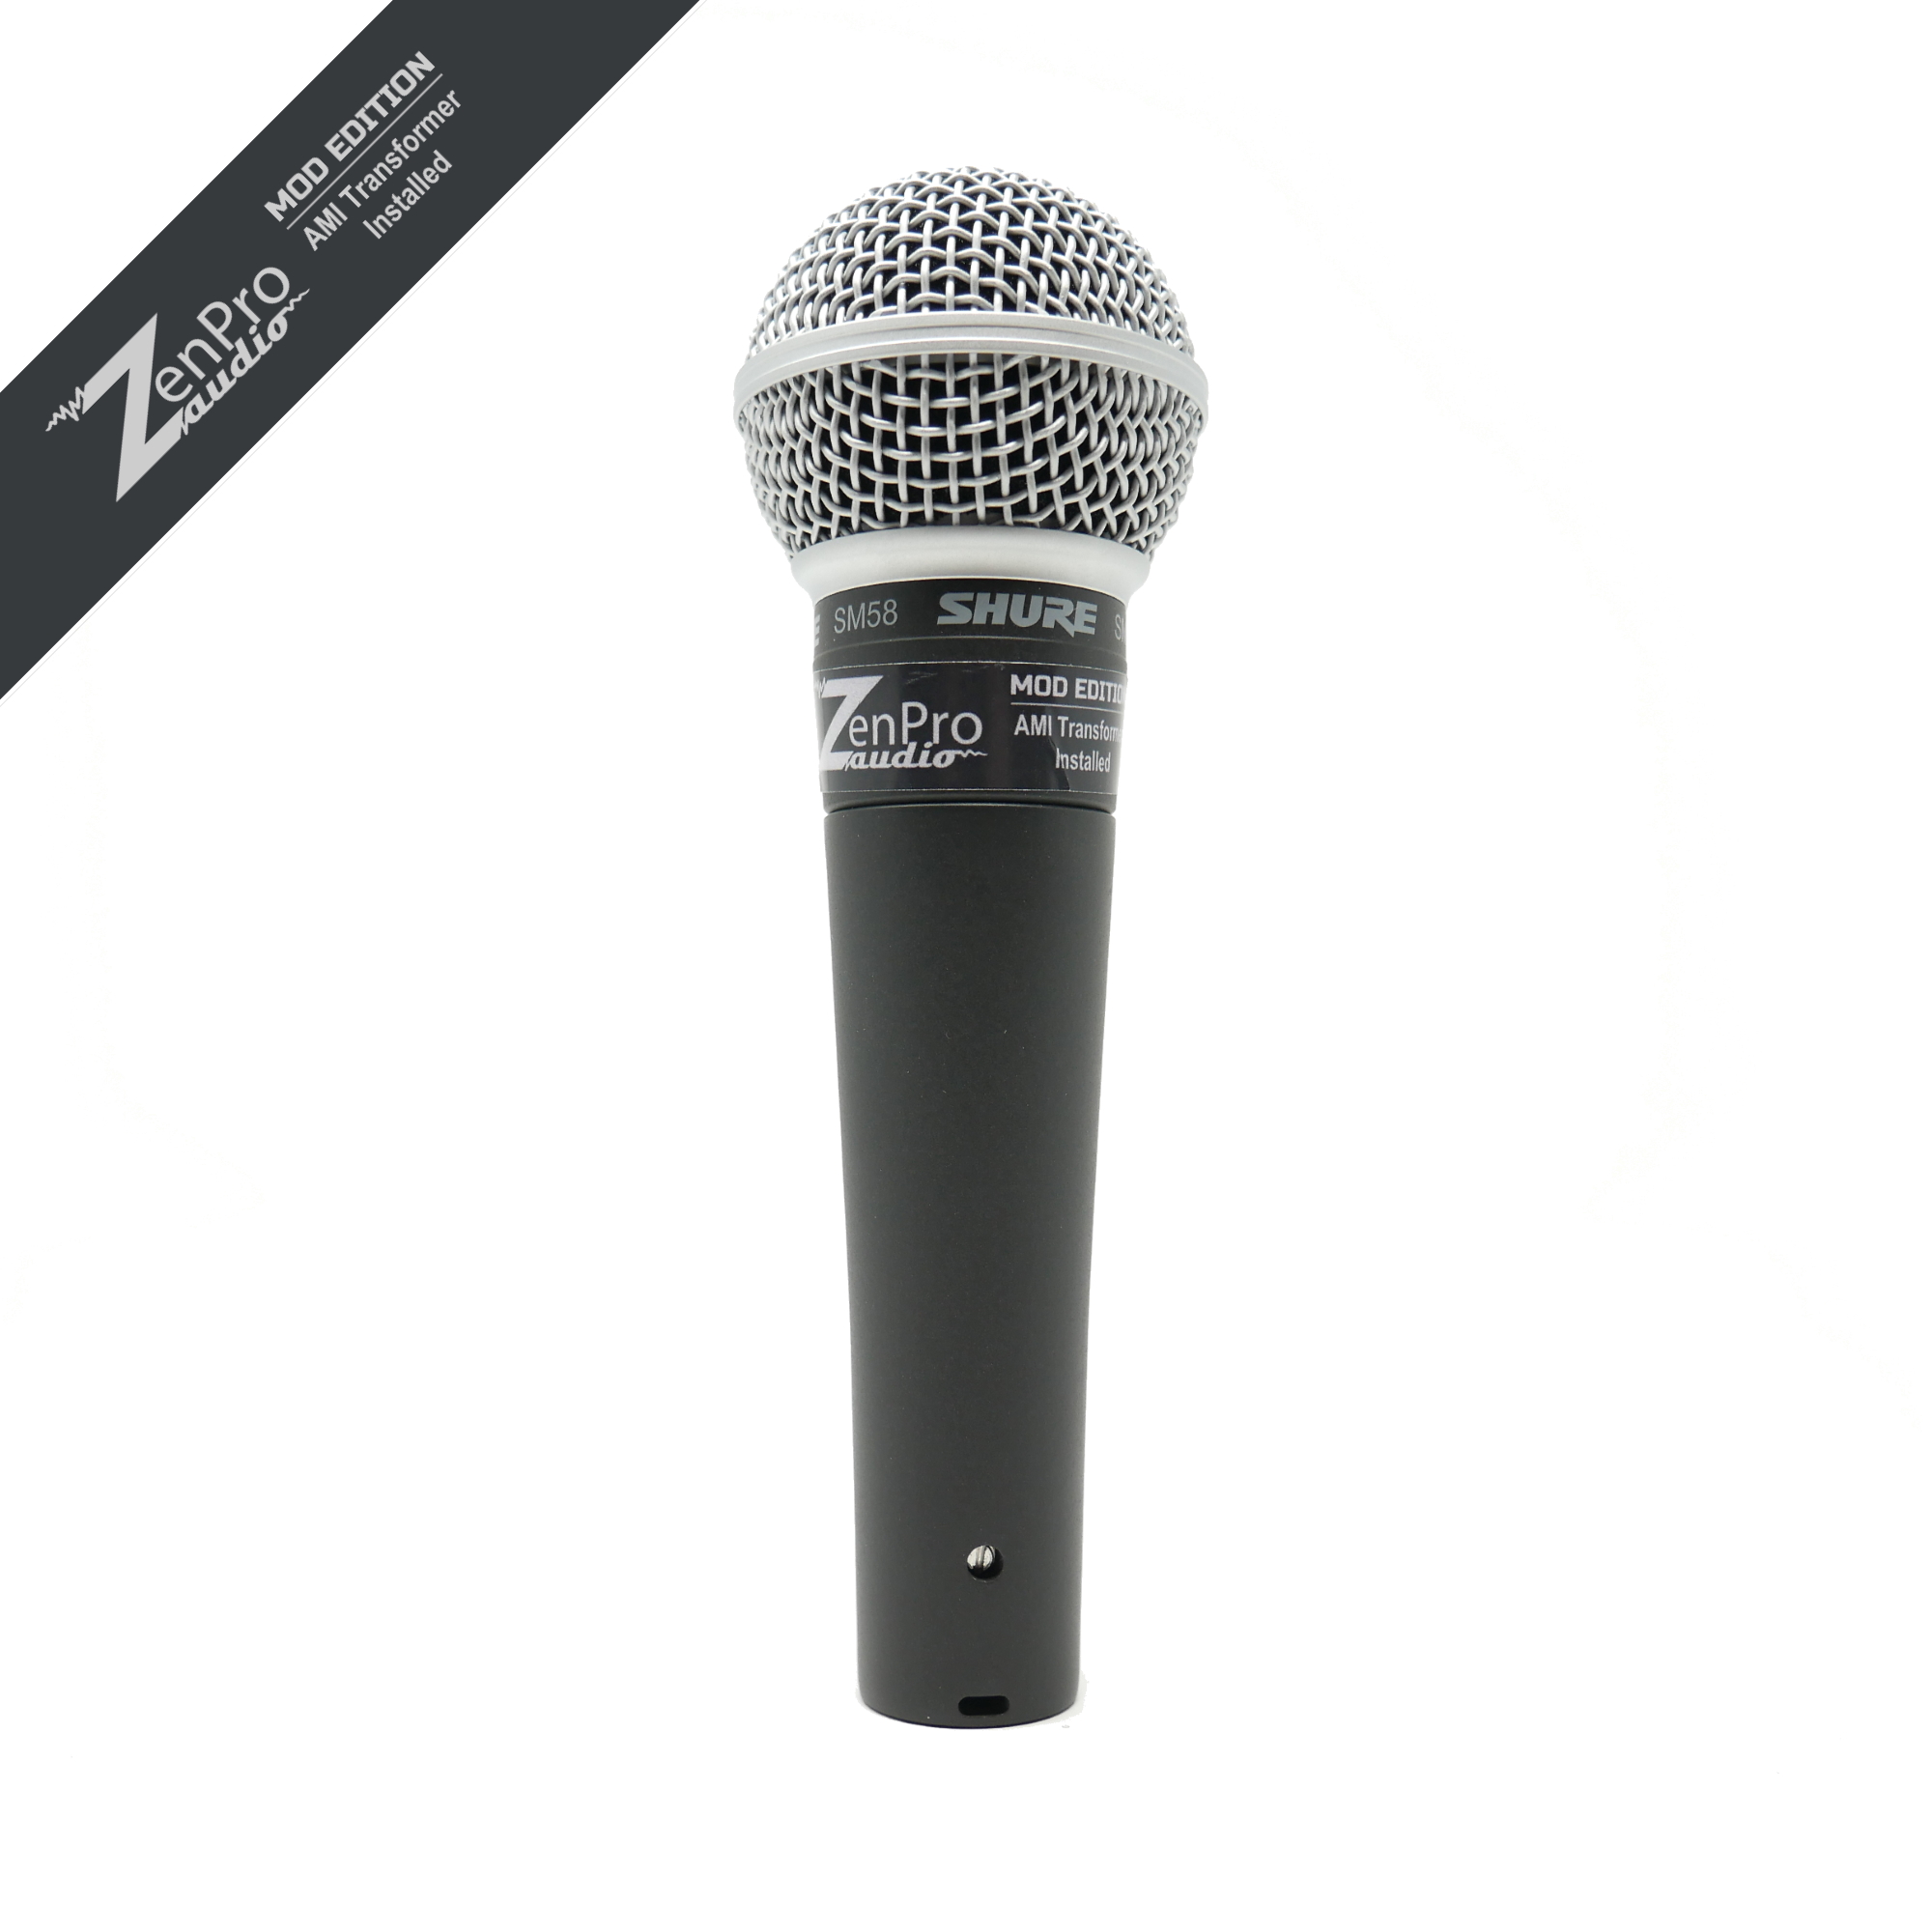 THE SM58: SETTING THE STANDARD - Shure USA